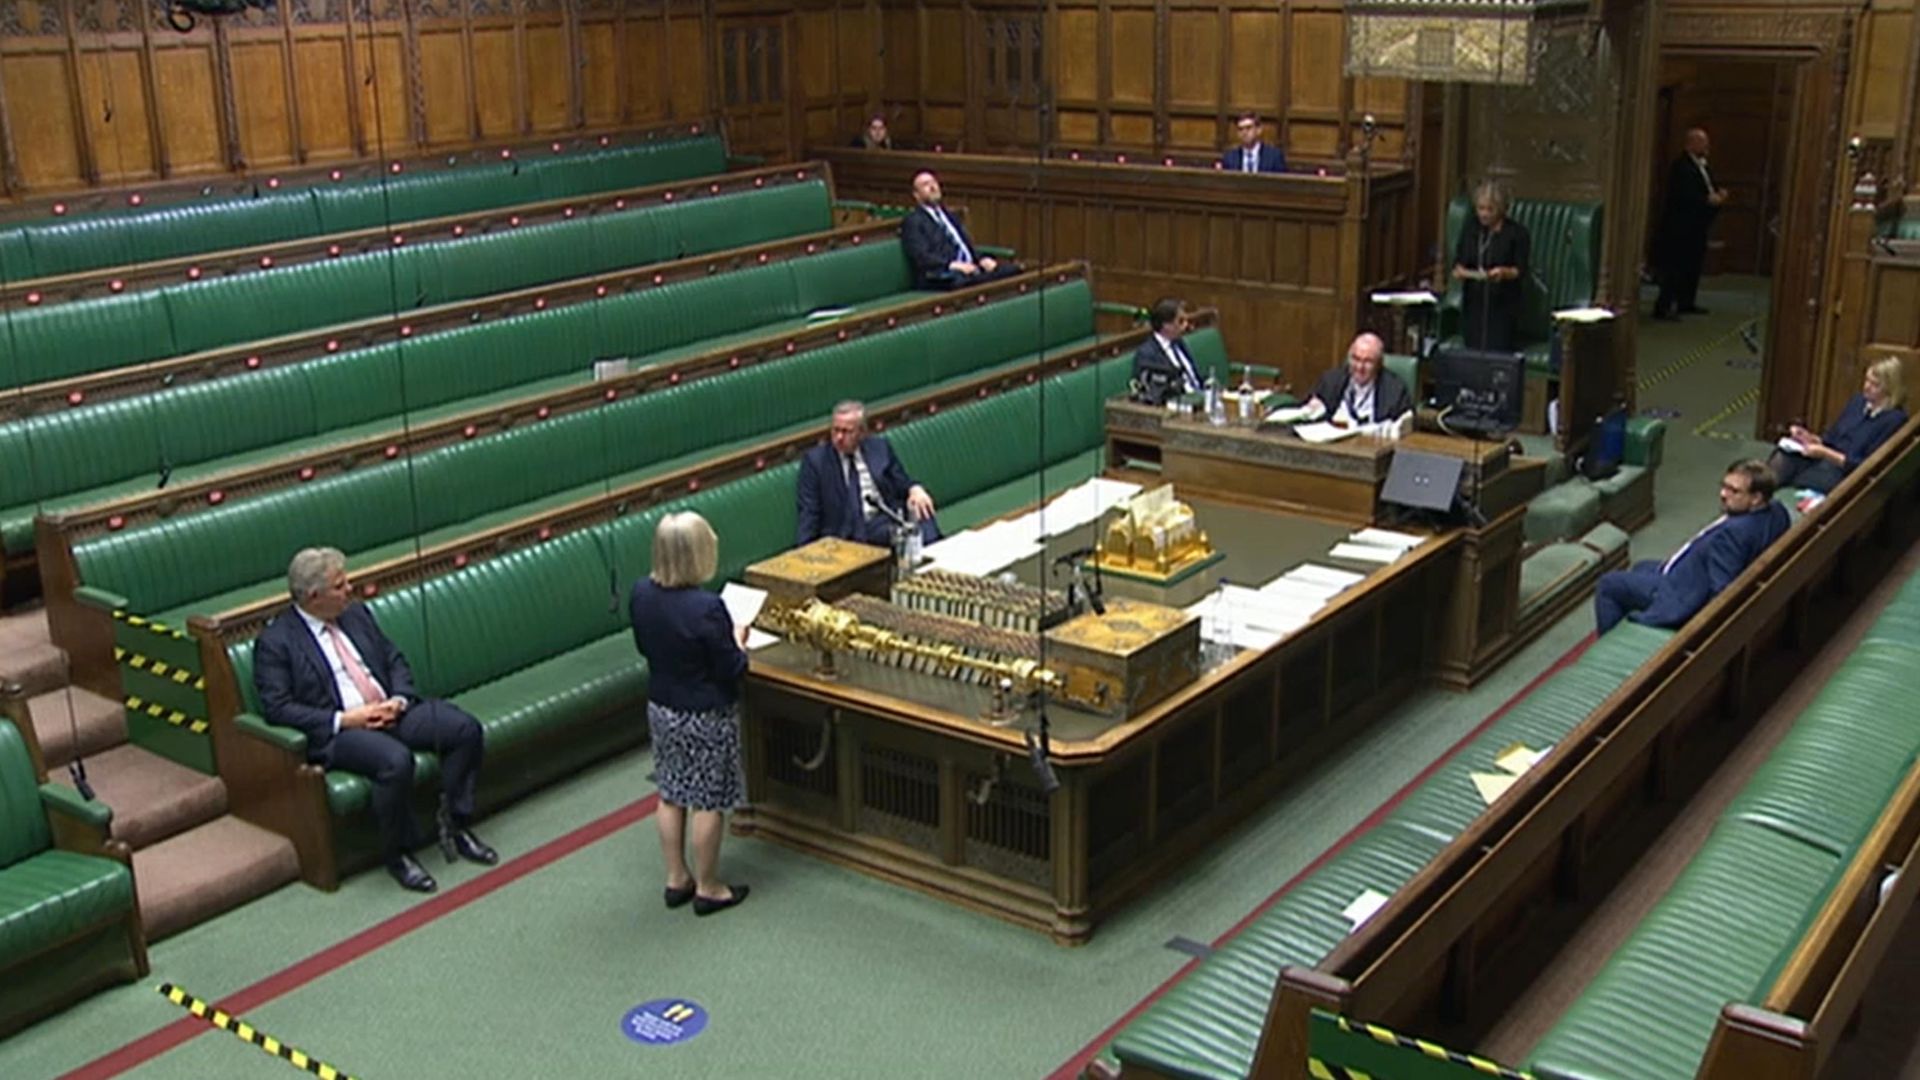 A vote is read out in the House of Commons. - Credit: PA